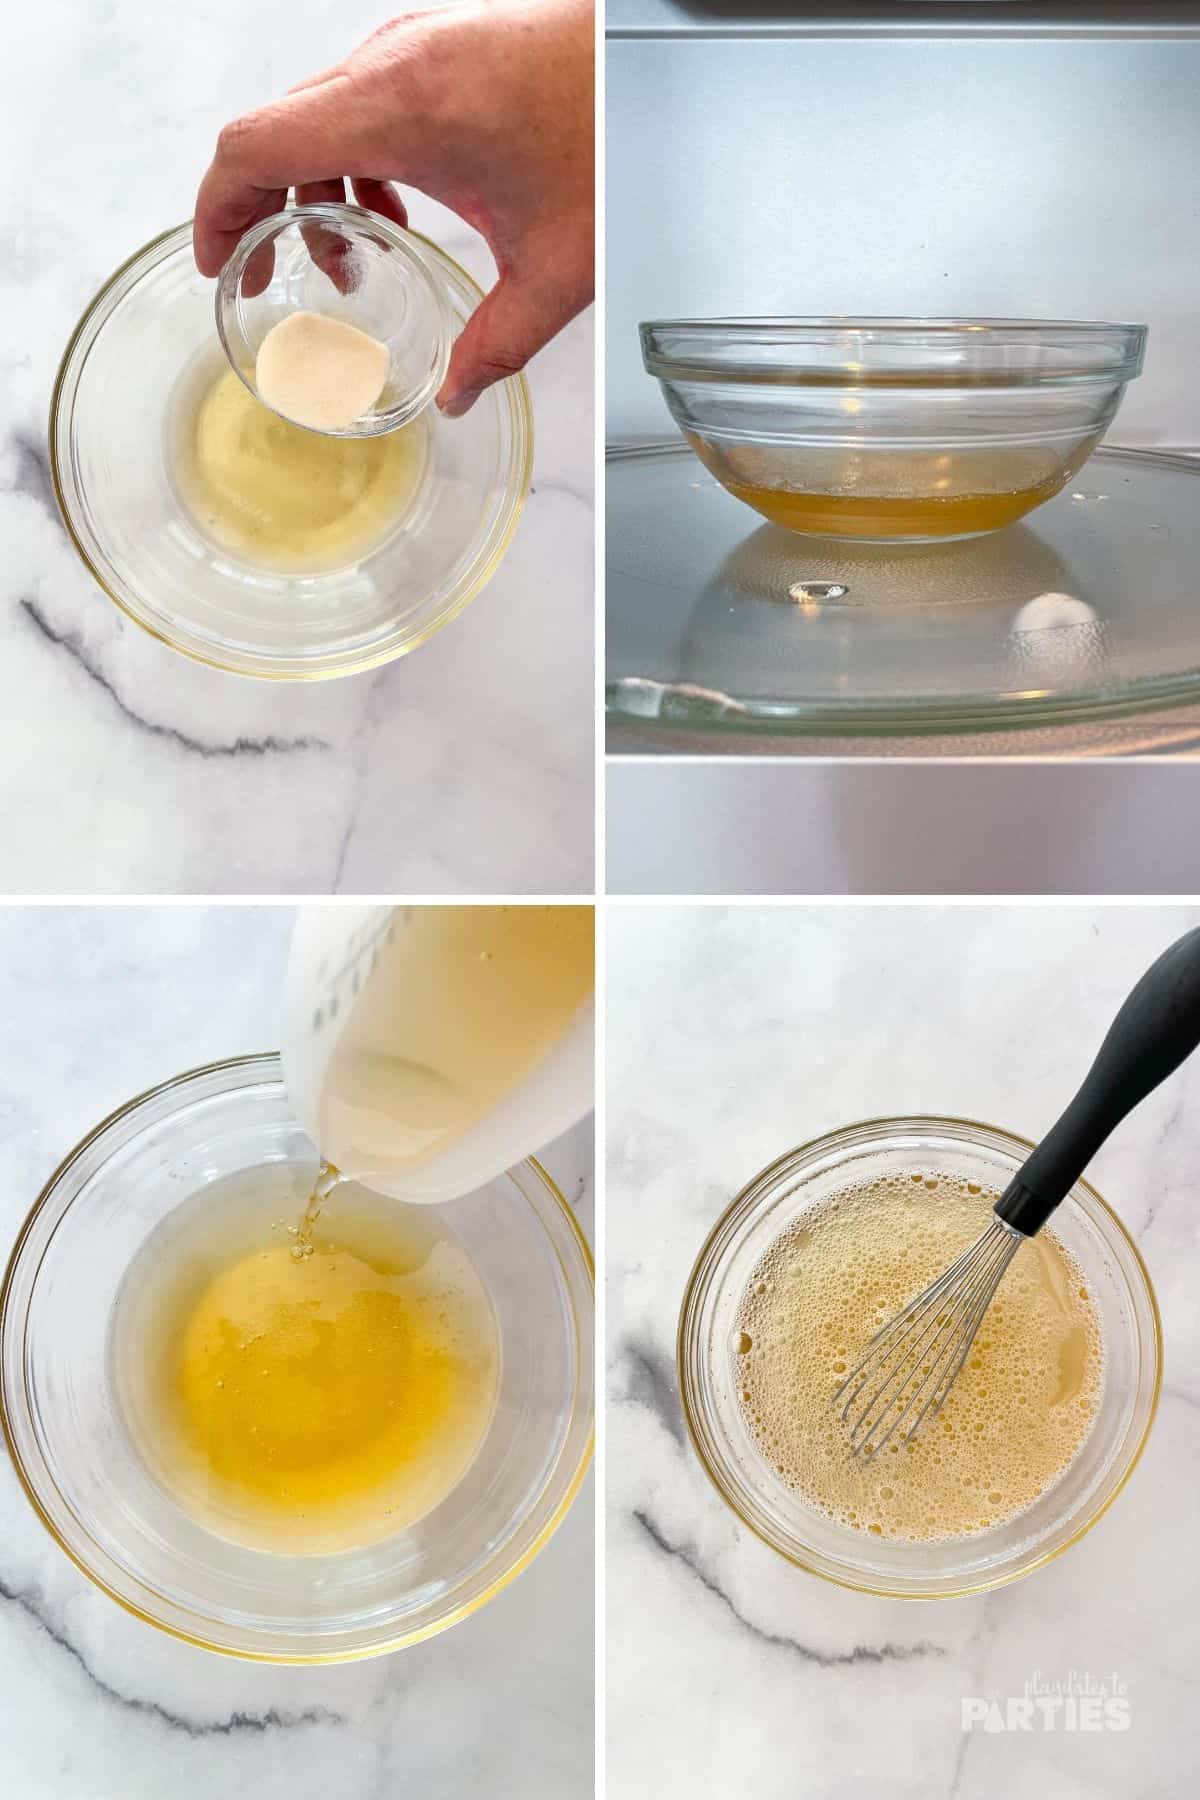 How to make clear jello for jello shots steps 1 to 4.